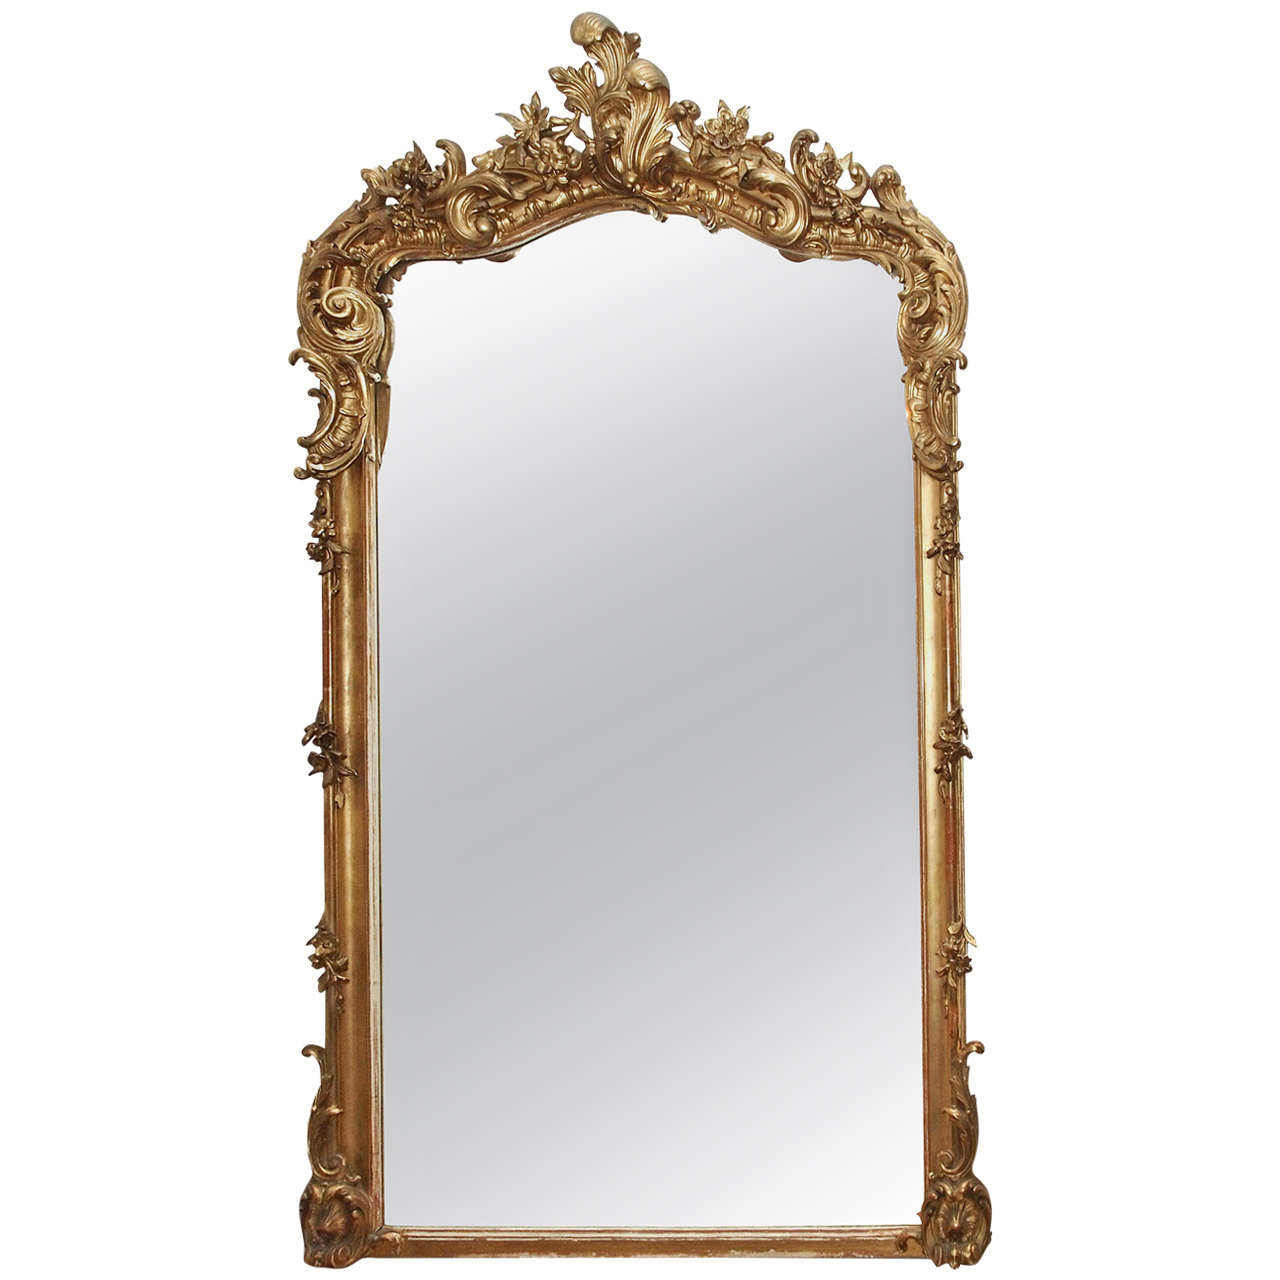 Antique French Louis Xv Fine Gold Leaf Beveled Mirror At 1stdibs